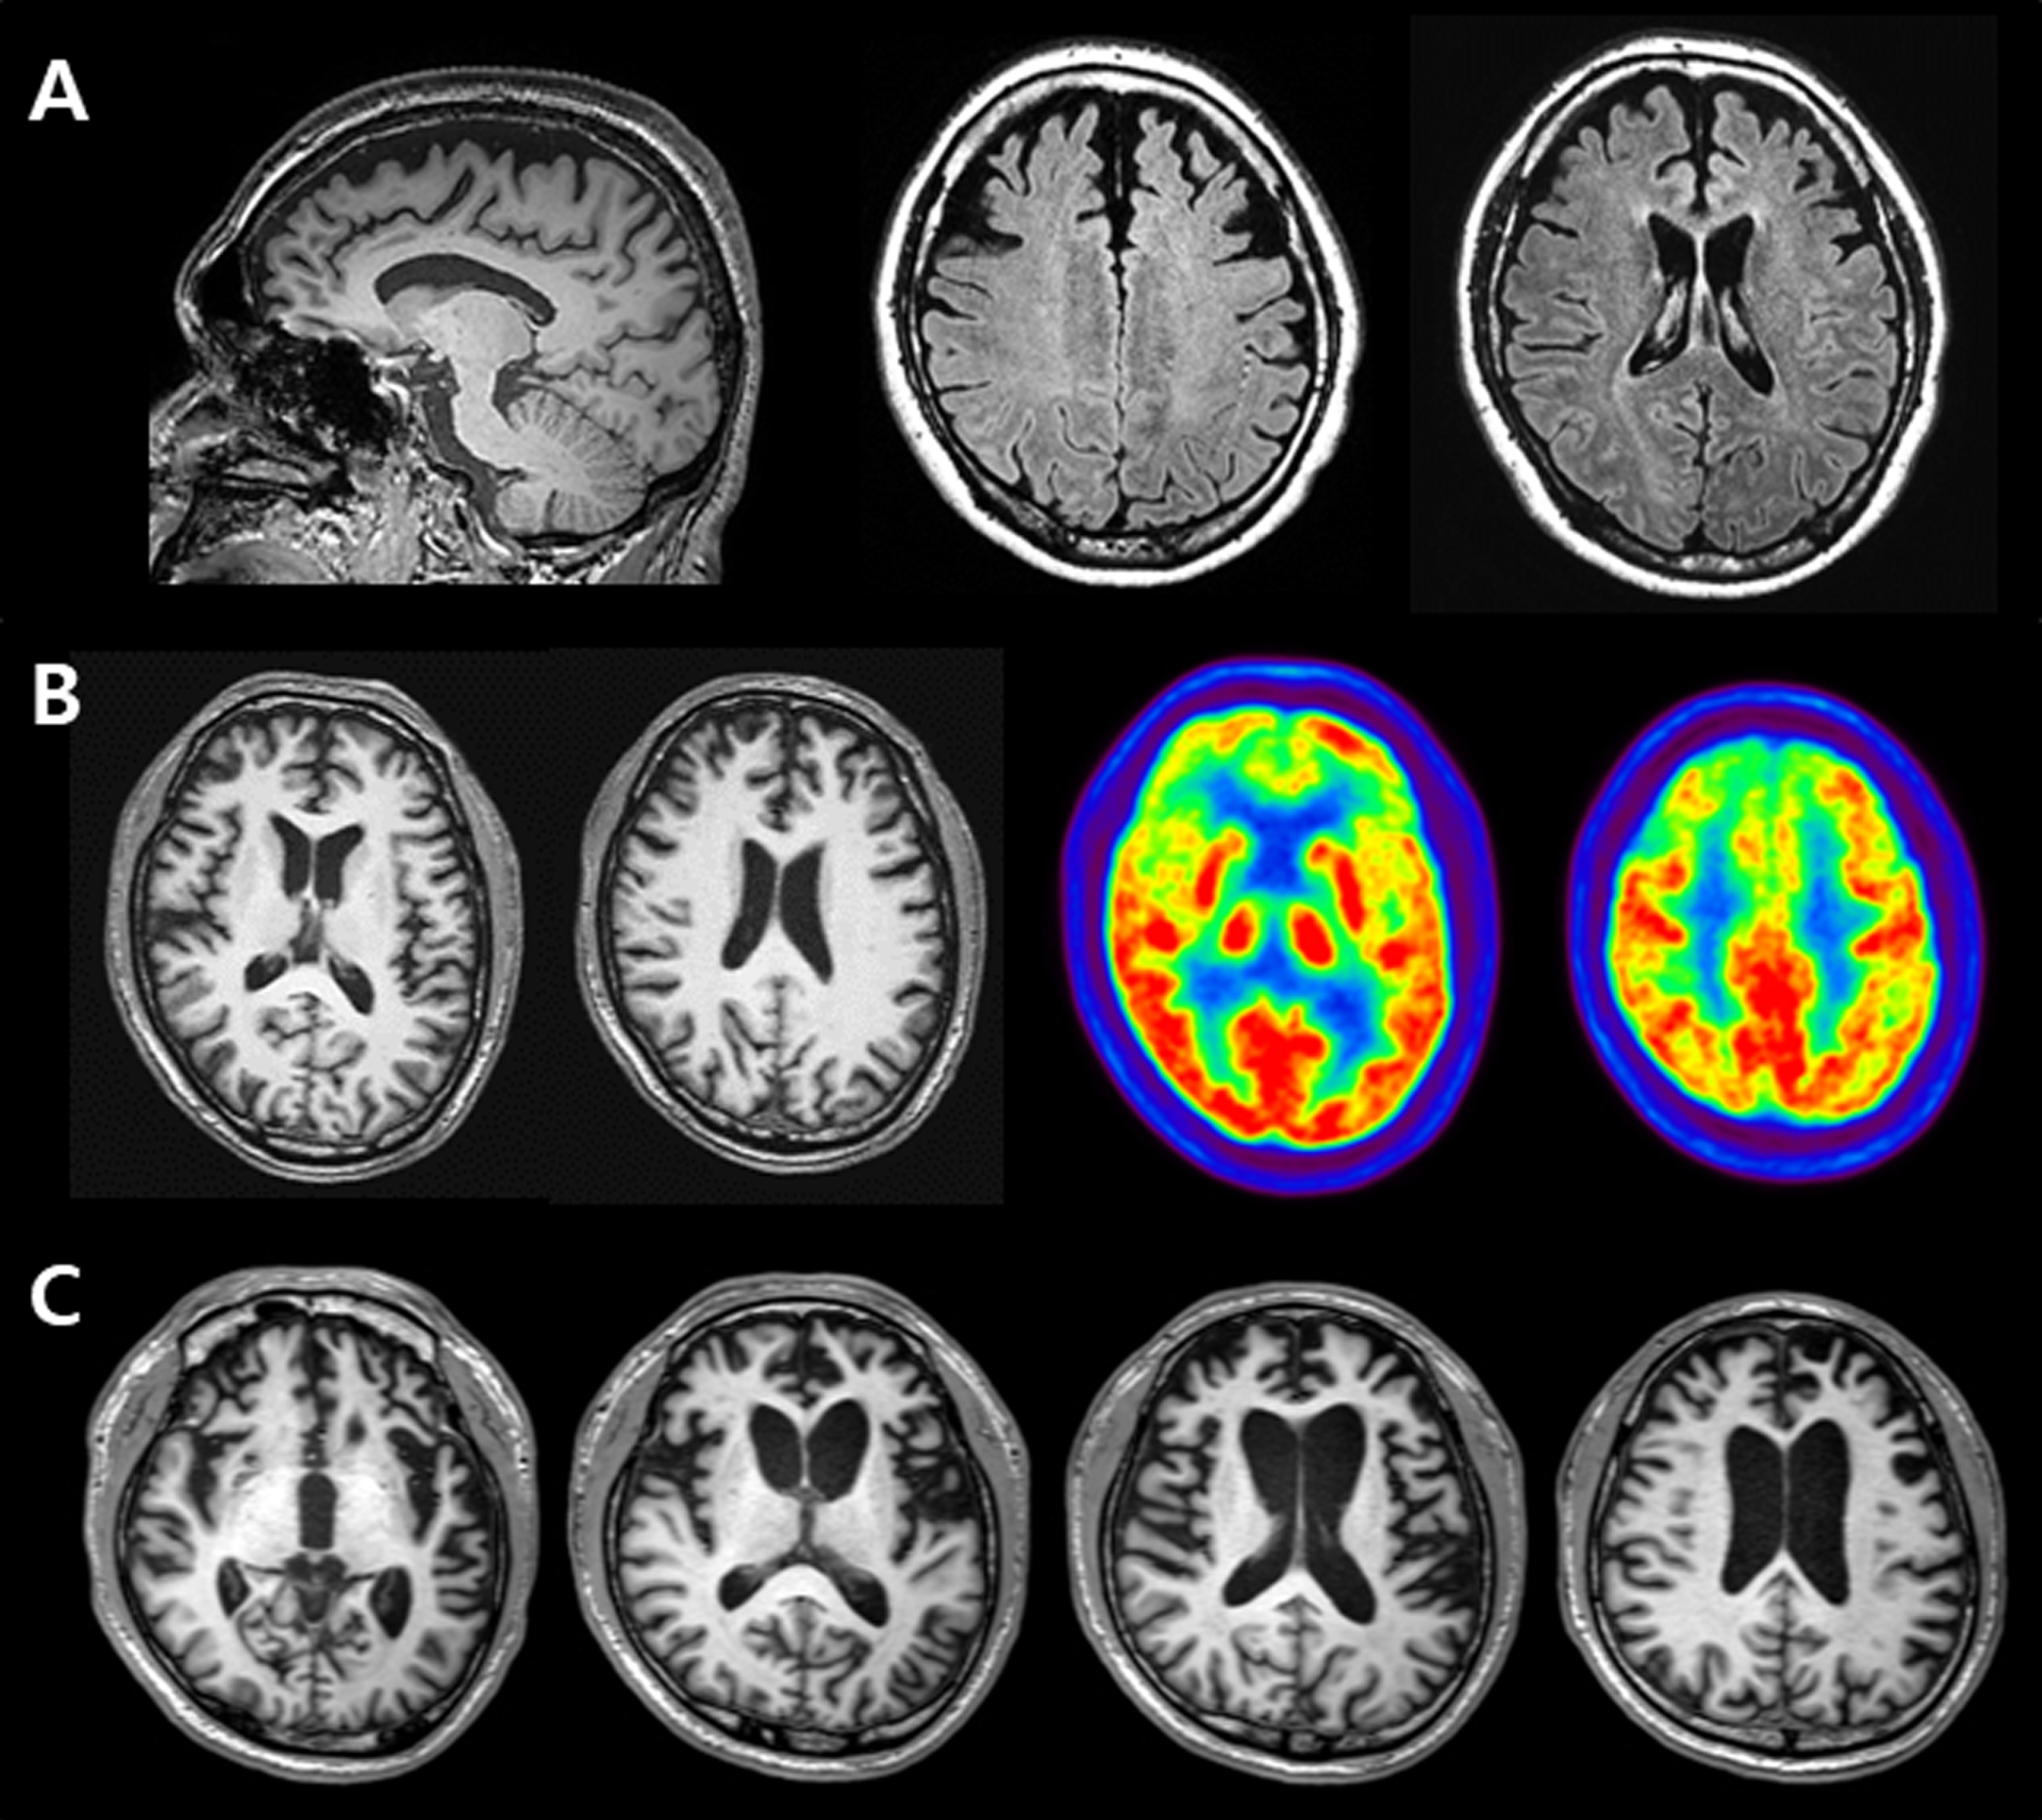 A) Brain MRIs of FTD-18 who carried variant p.G706R of the MAPT gene, revealing bilateral and symmetric frontal atrophy. B) Brain MRIs and FDG-PET images of FTD-13 who carried variant M232R of the PRNP gene, showing cortical atrophy and severe glucose hypometabolism in the bifrontal areas. C) Brain MRIs of FTD-39 who carried variant M232R of the PRNP gene, demonstrating prominent bilateral frontotemporal atrophy, worse on the left.